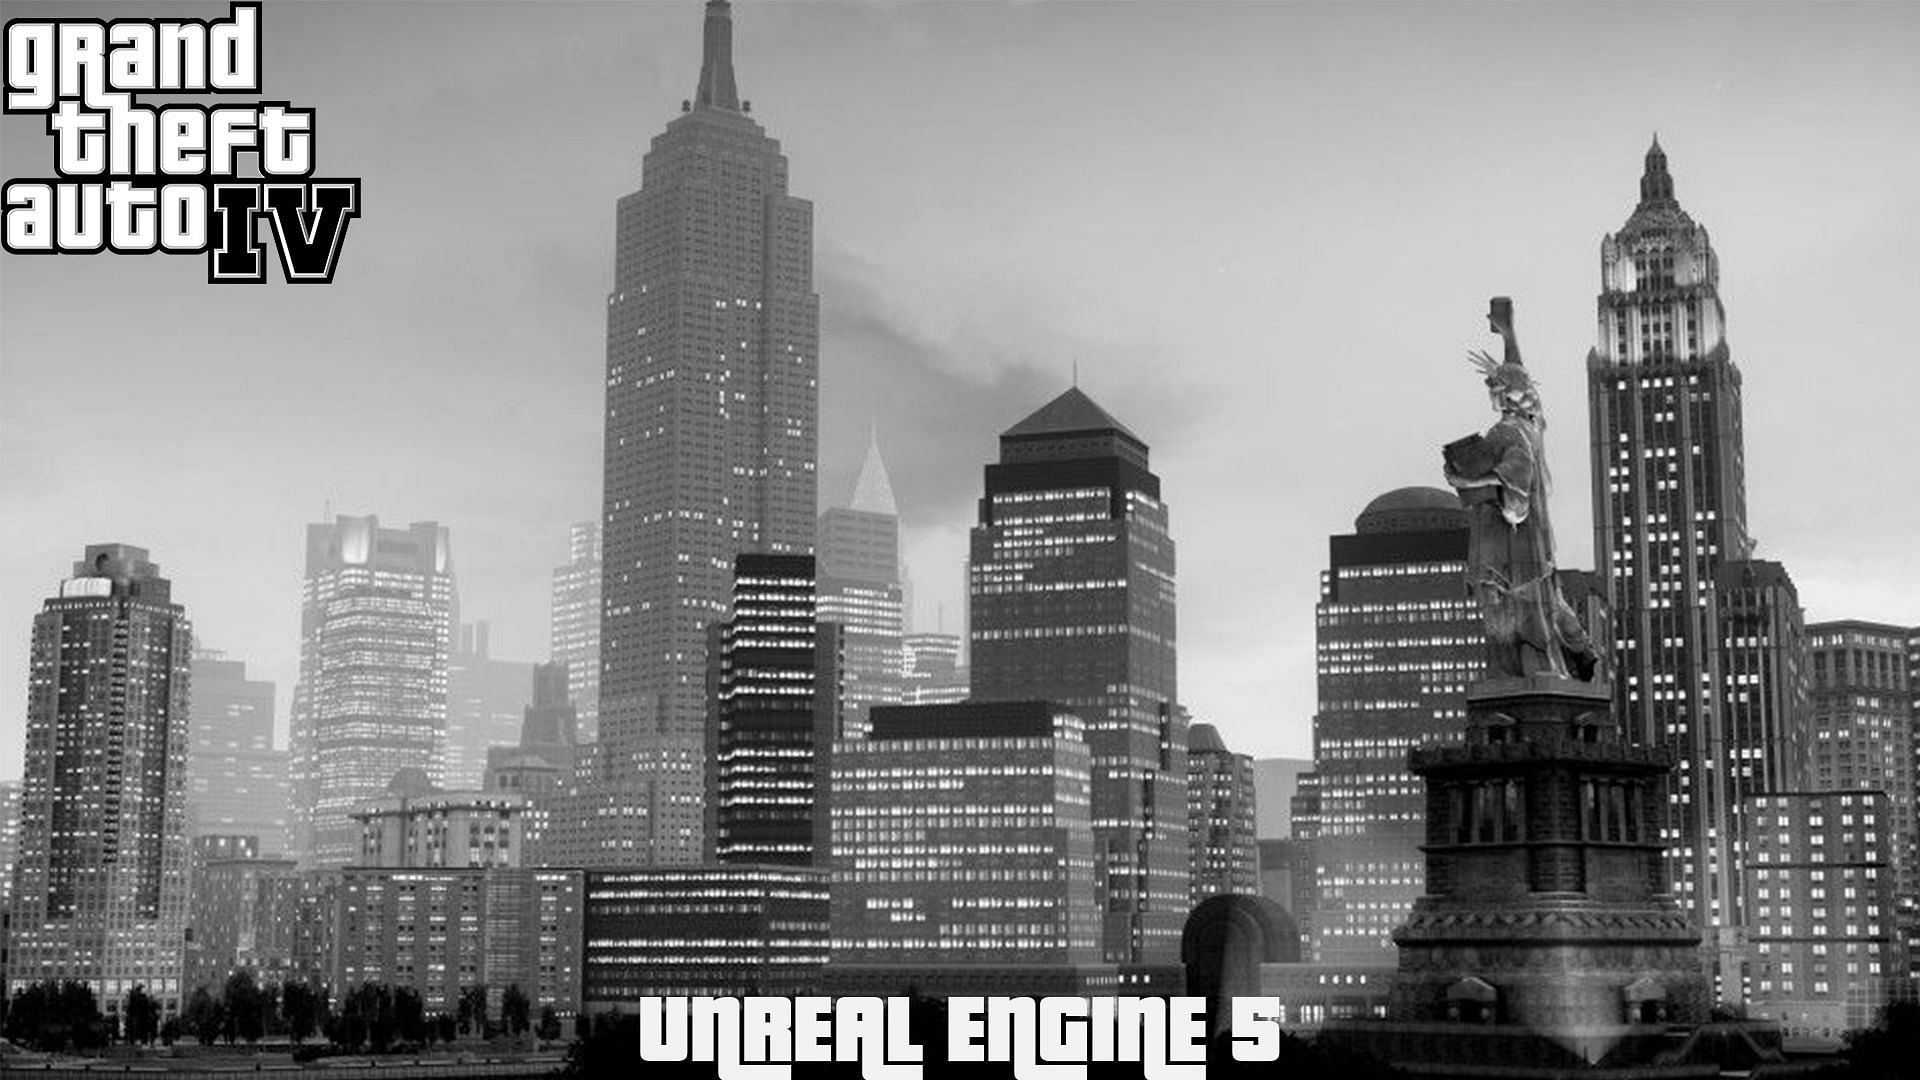 A GTA 4 remake is something fans of the franchise have been asking for (Image via Sportskeeda)